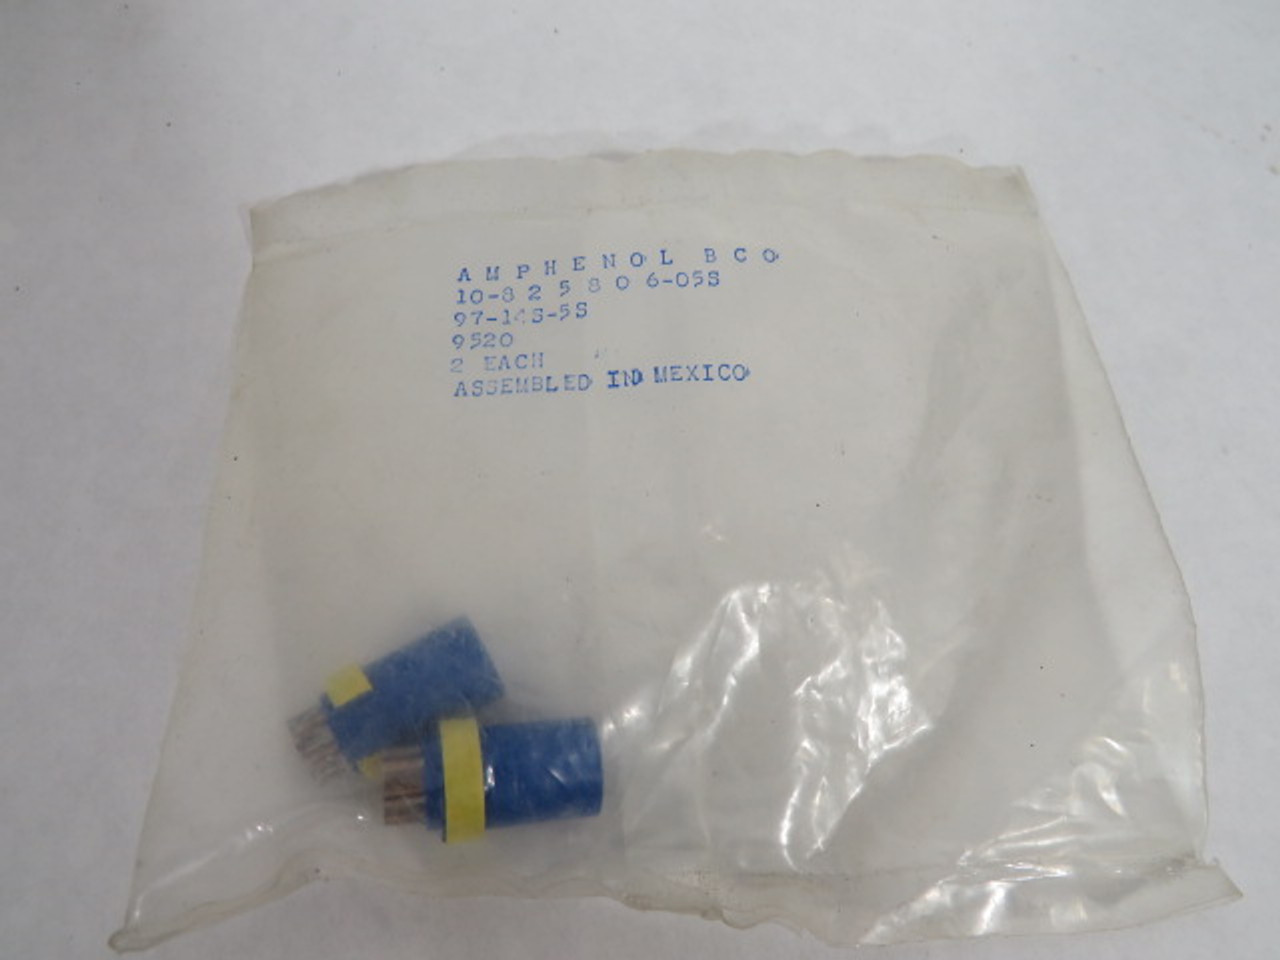 Amphenol 97-14S-5S 10-825806-05S Socket Insert for Connector 2-Pk ! NWB !